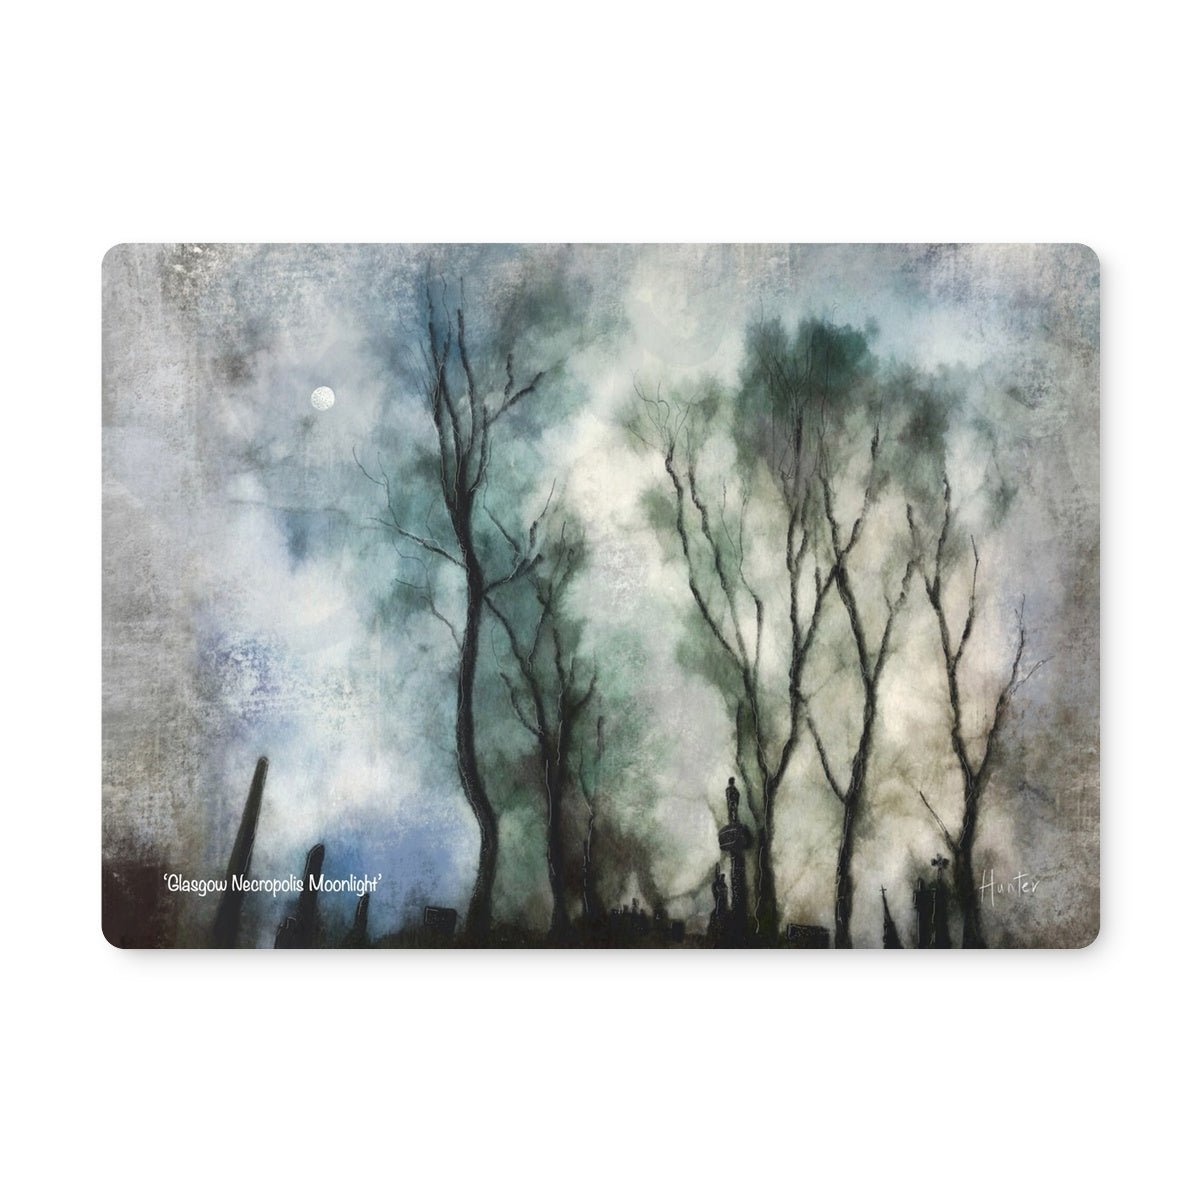 Glasgow Necropolis Moonlight Art Gifts Placemat-Placemats-Edinburgh & Glasgow Art Gallery-4 Placemats-Paintings, Prints, Homeware, Art Gifts From Scotland By Scottish Artist Kevin Hunter